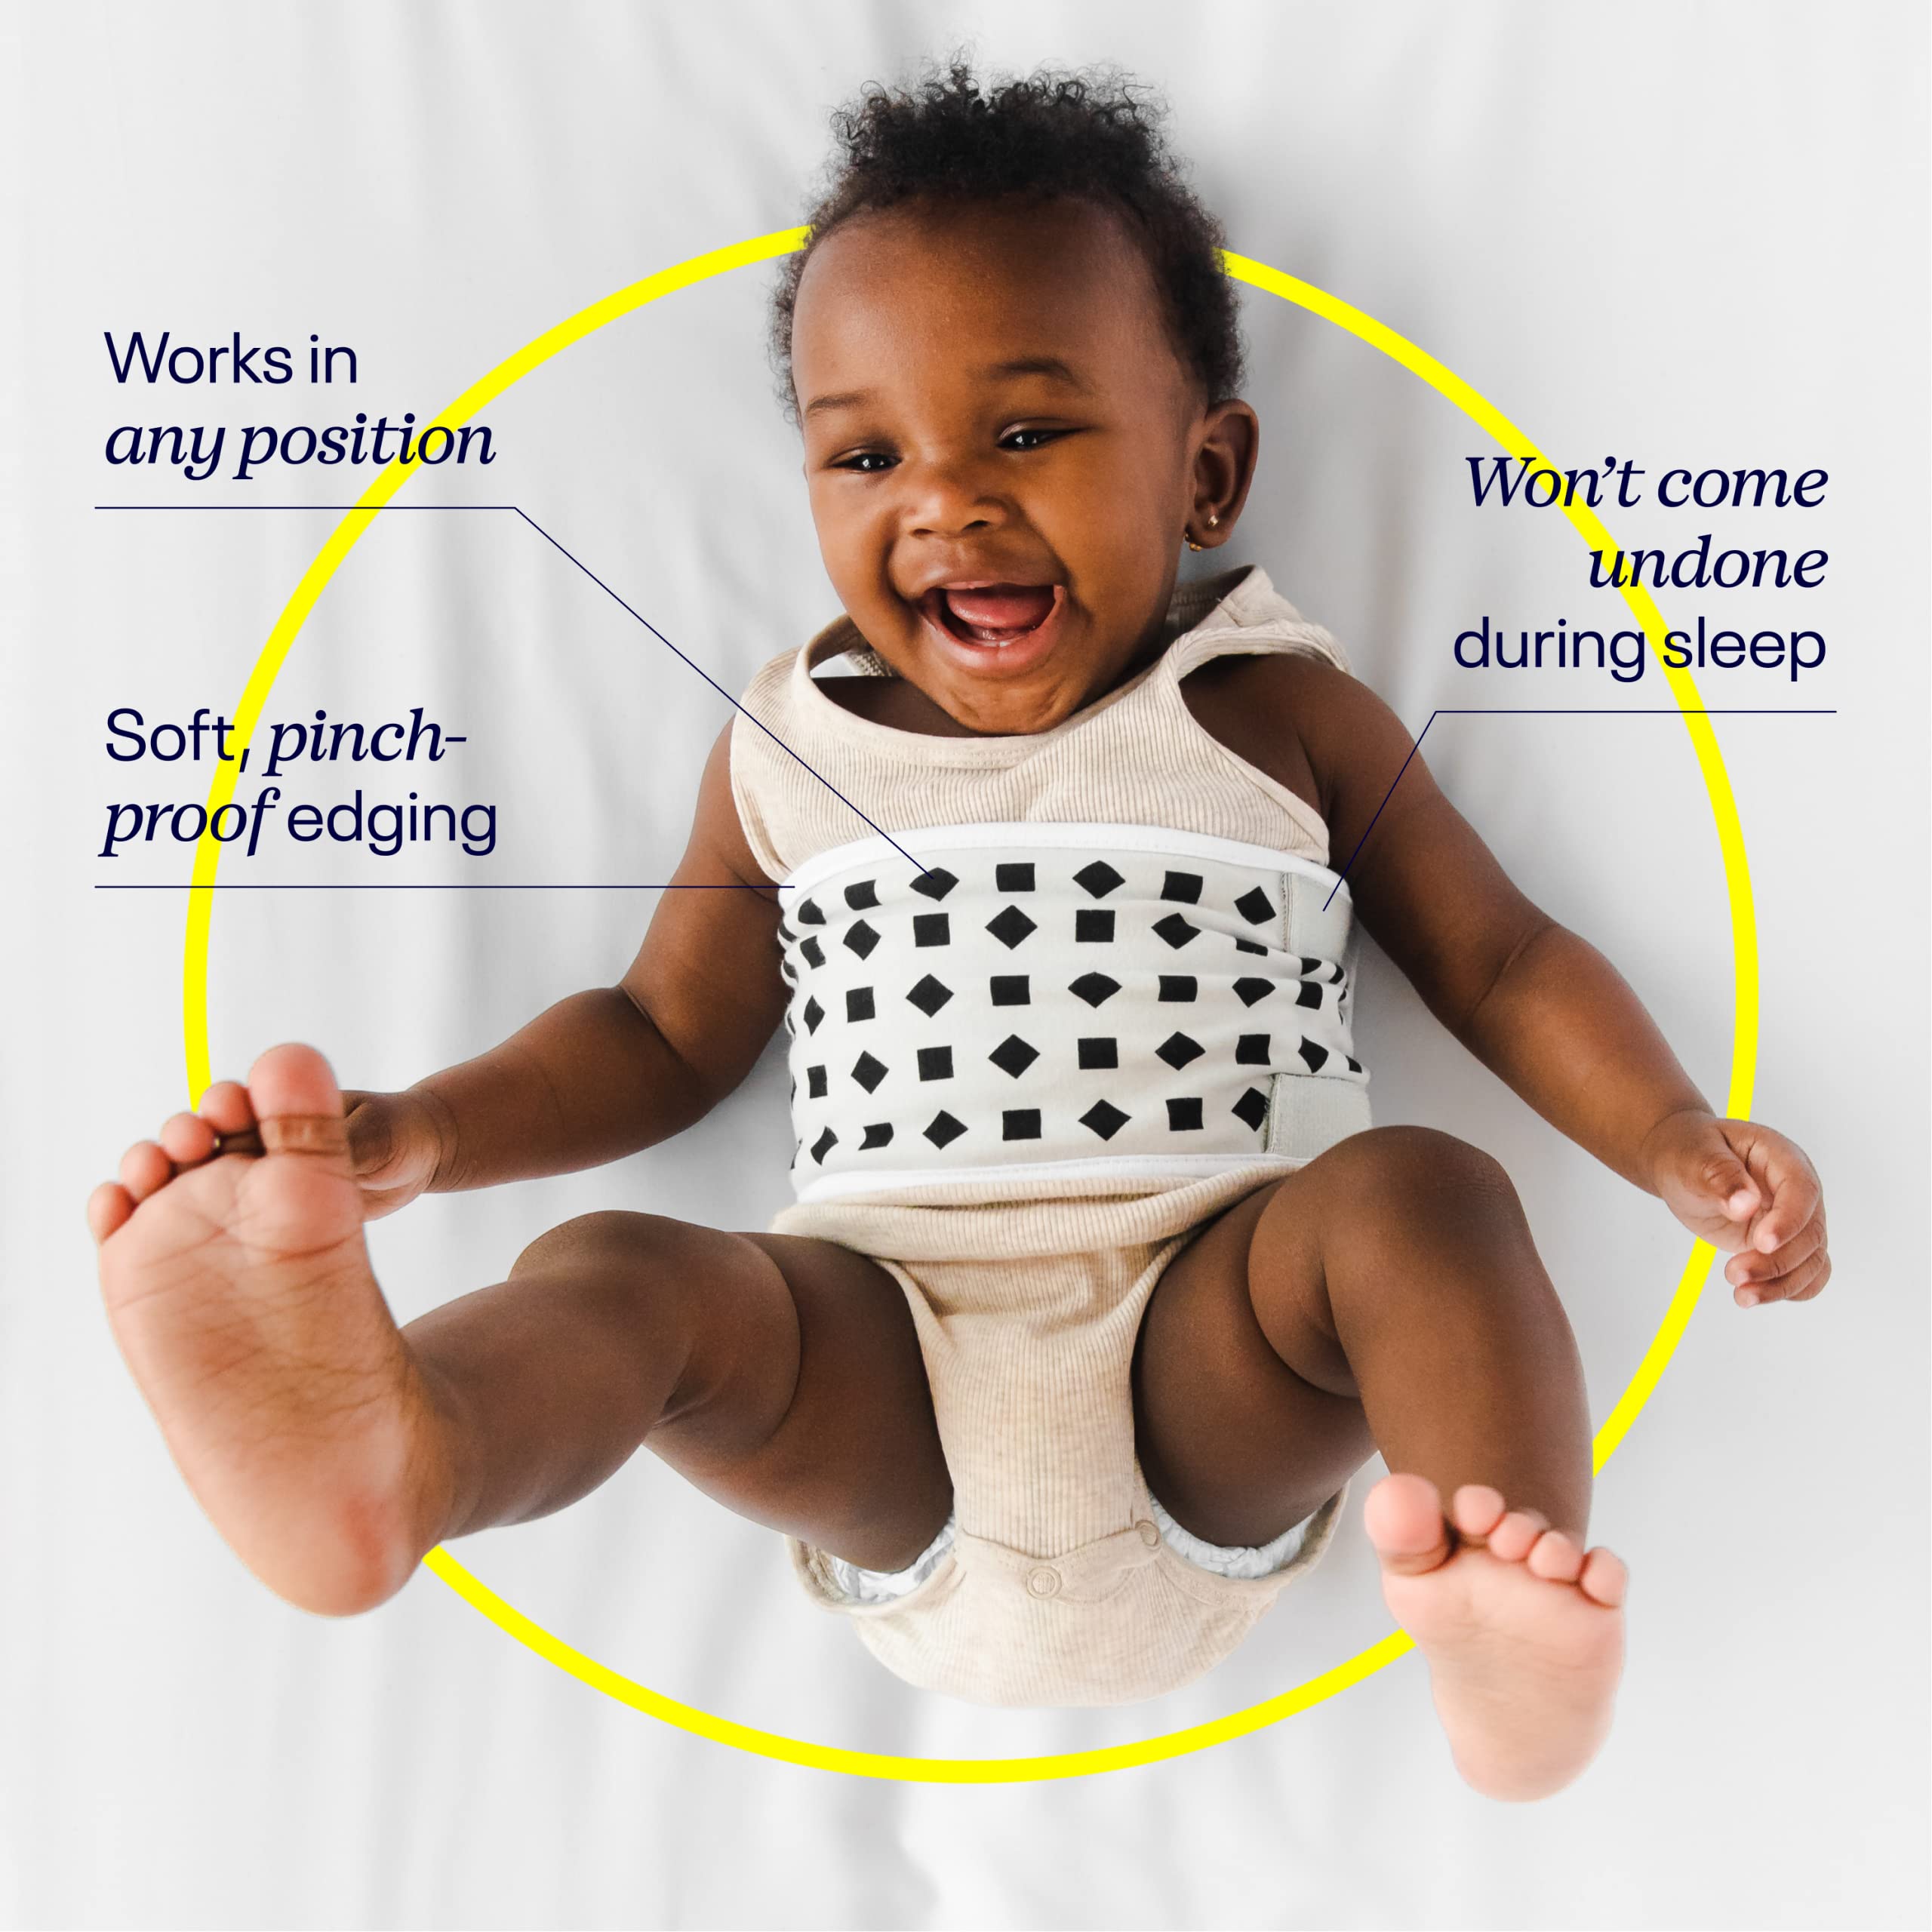 Nanit Pro Smart Baby Monitor & Flex Stand - 1080p Secure Wi-Fi Video Camera, Sensor-Free Sleep & Breathing Motion Tracker, 2-Way Audio, Sound & Motion Alerts, Night Vision, and Breathing Band - White